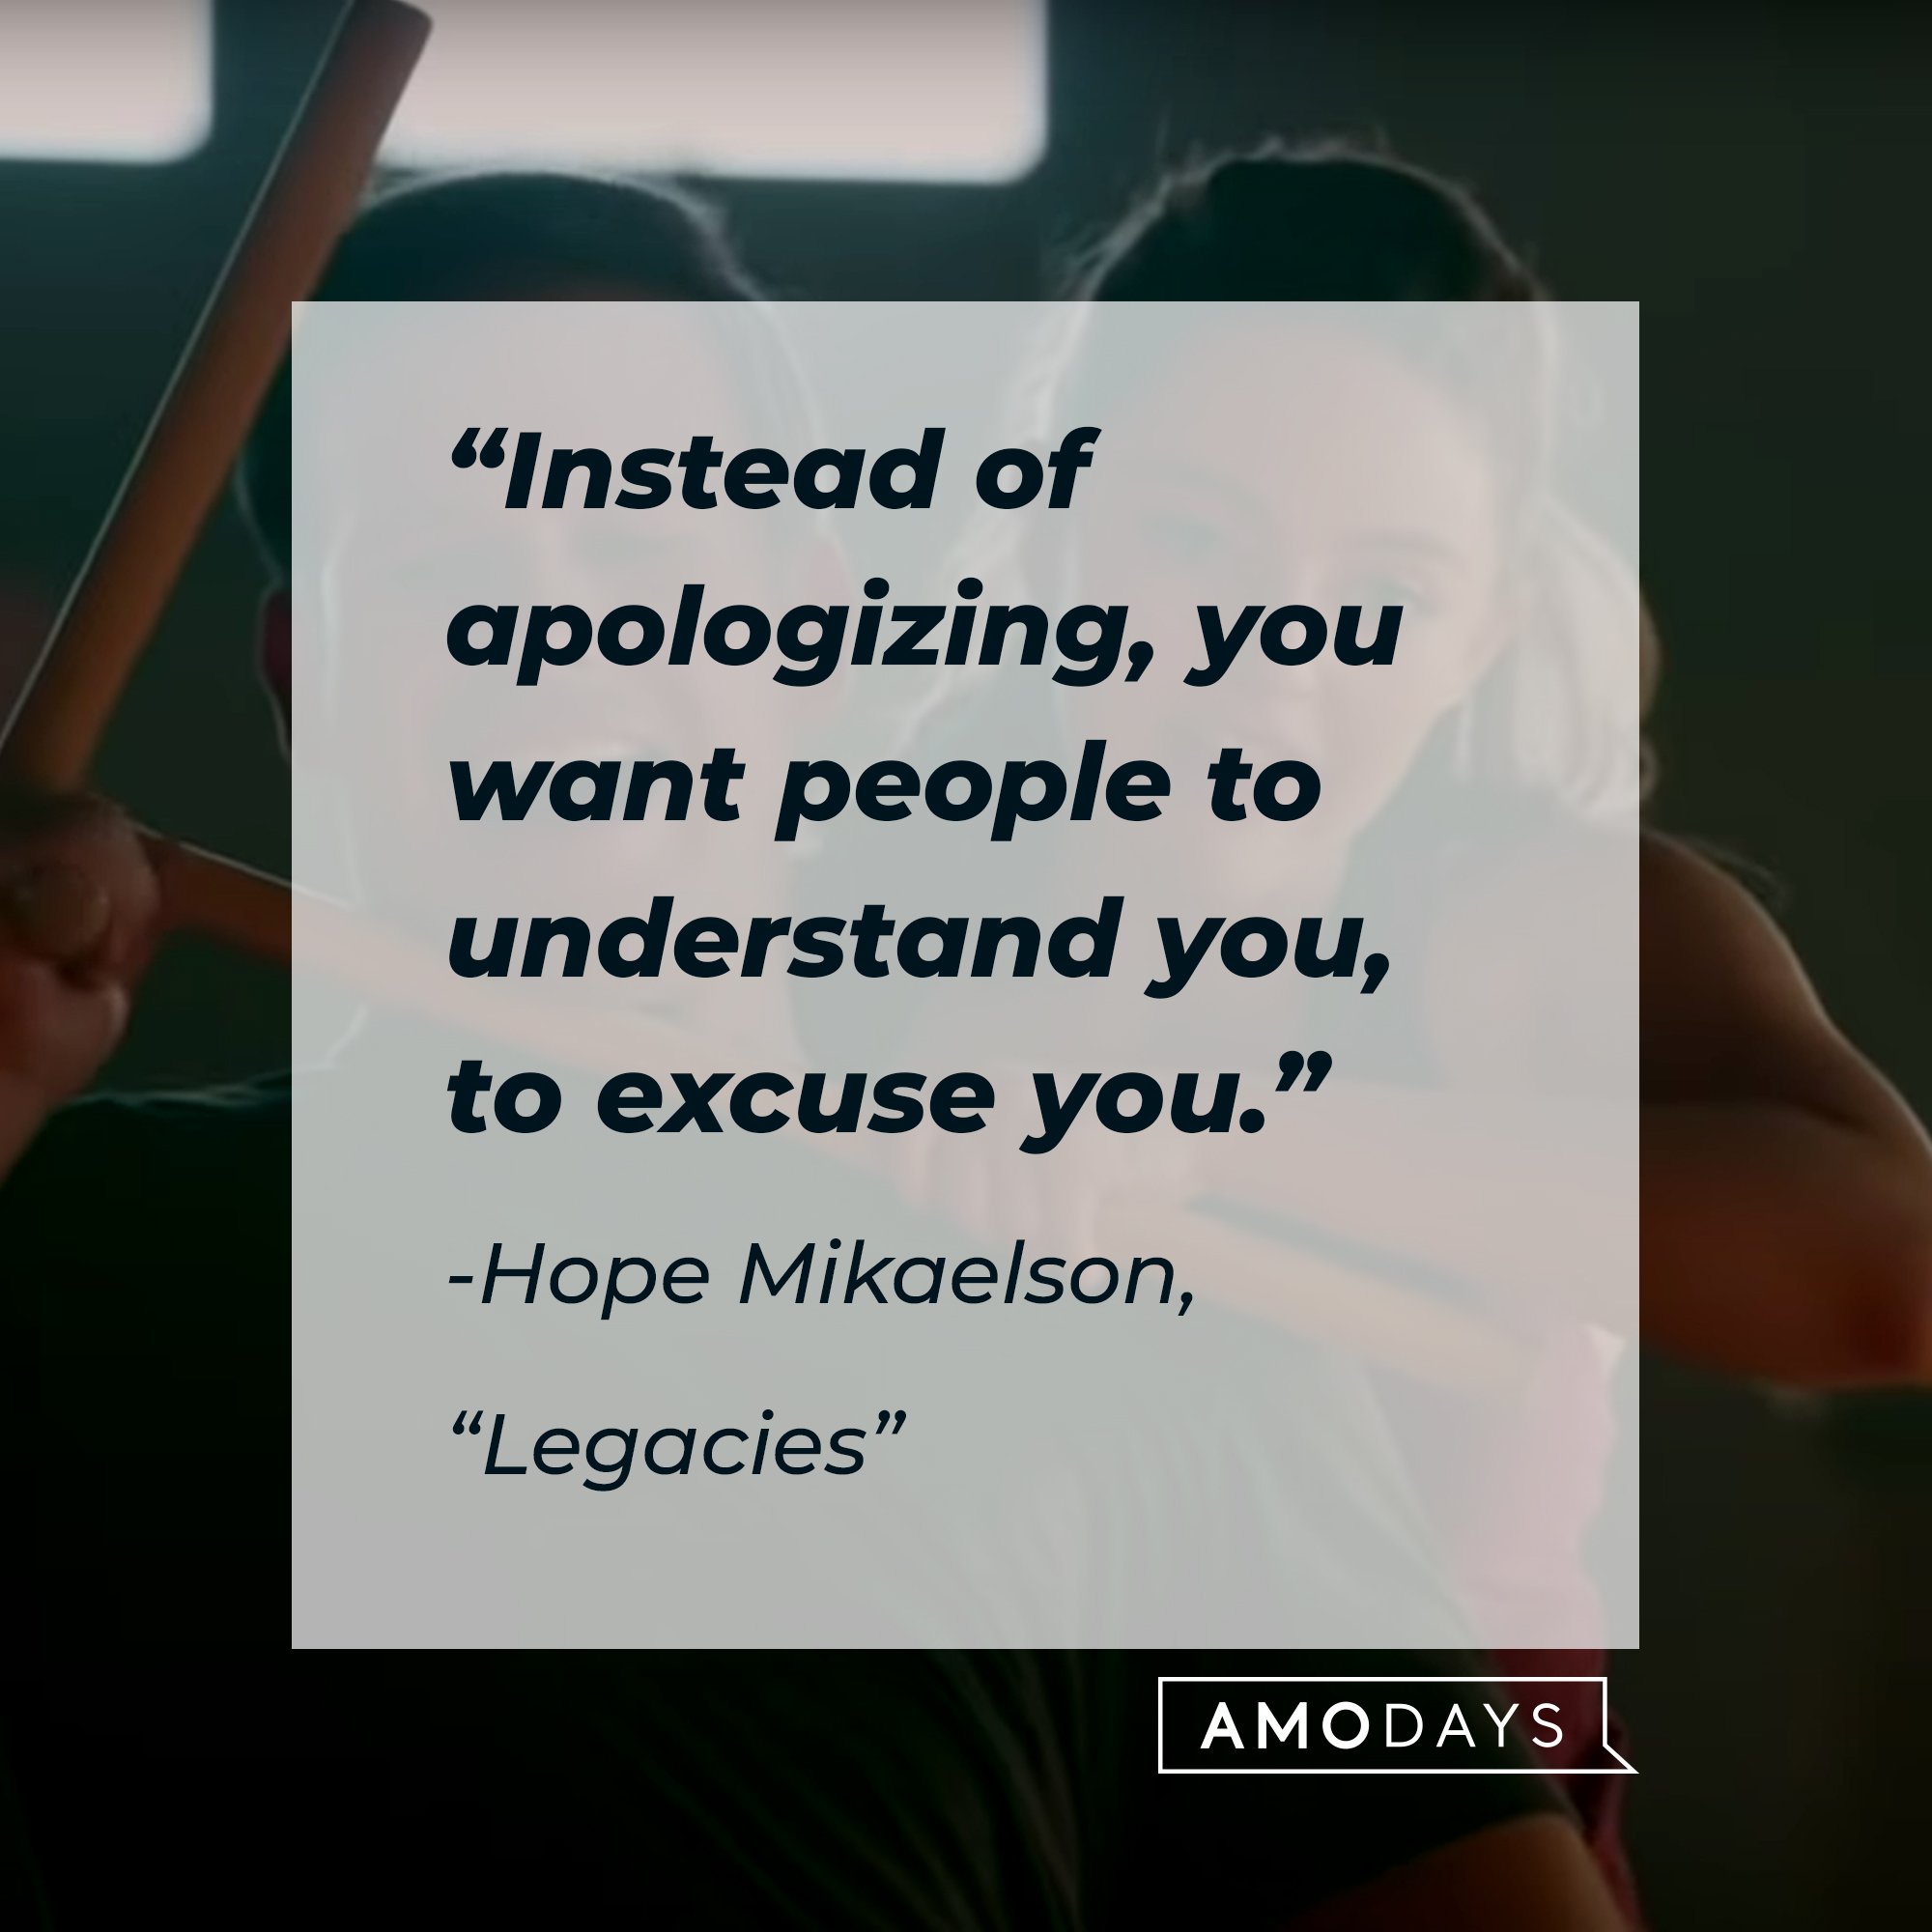 Hope Mikaelson with her quote: "Instead of apologizing, you want people to understand you, to excuse you." | Source: Facebook.com/CWLegacies